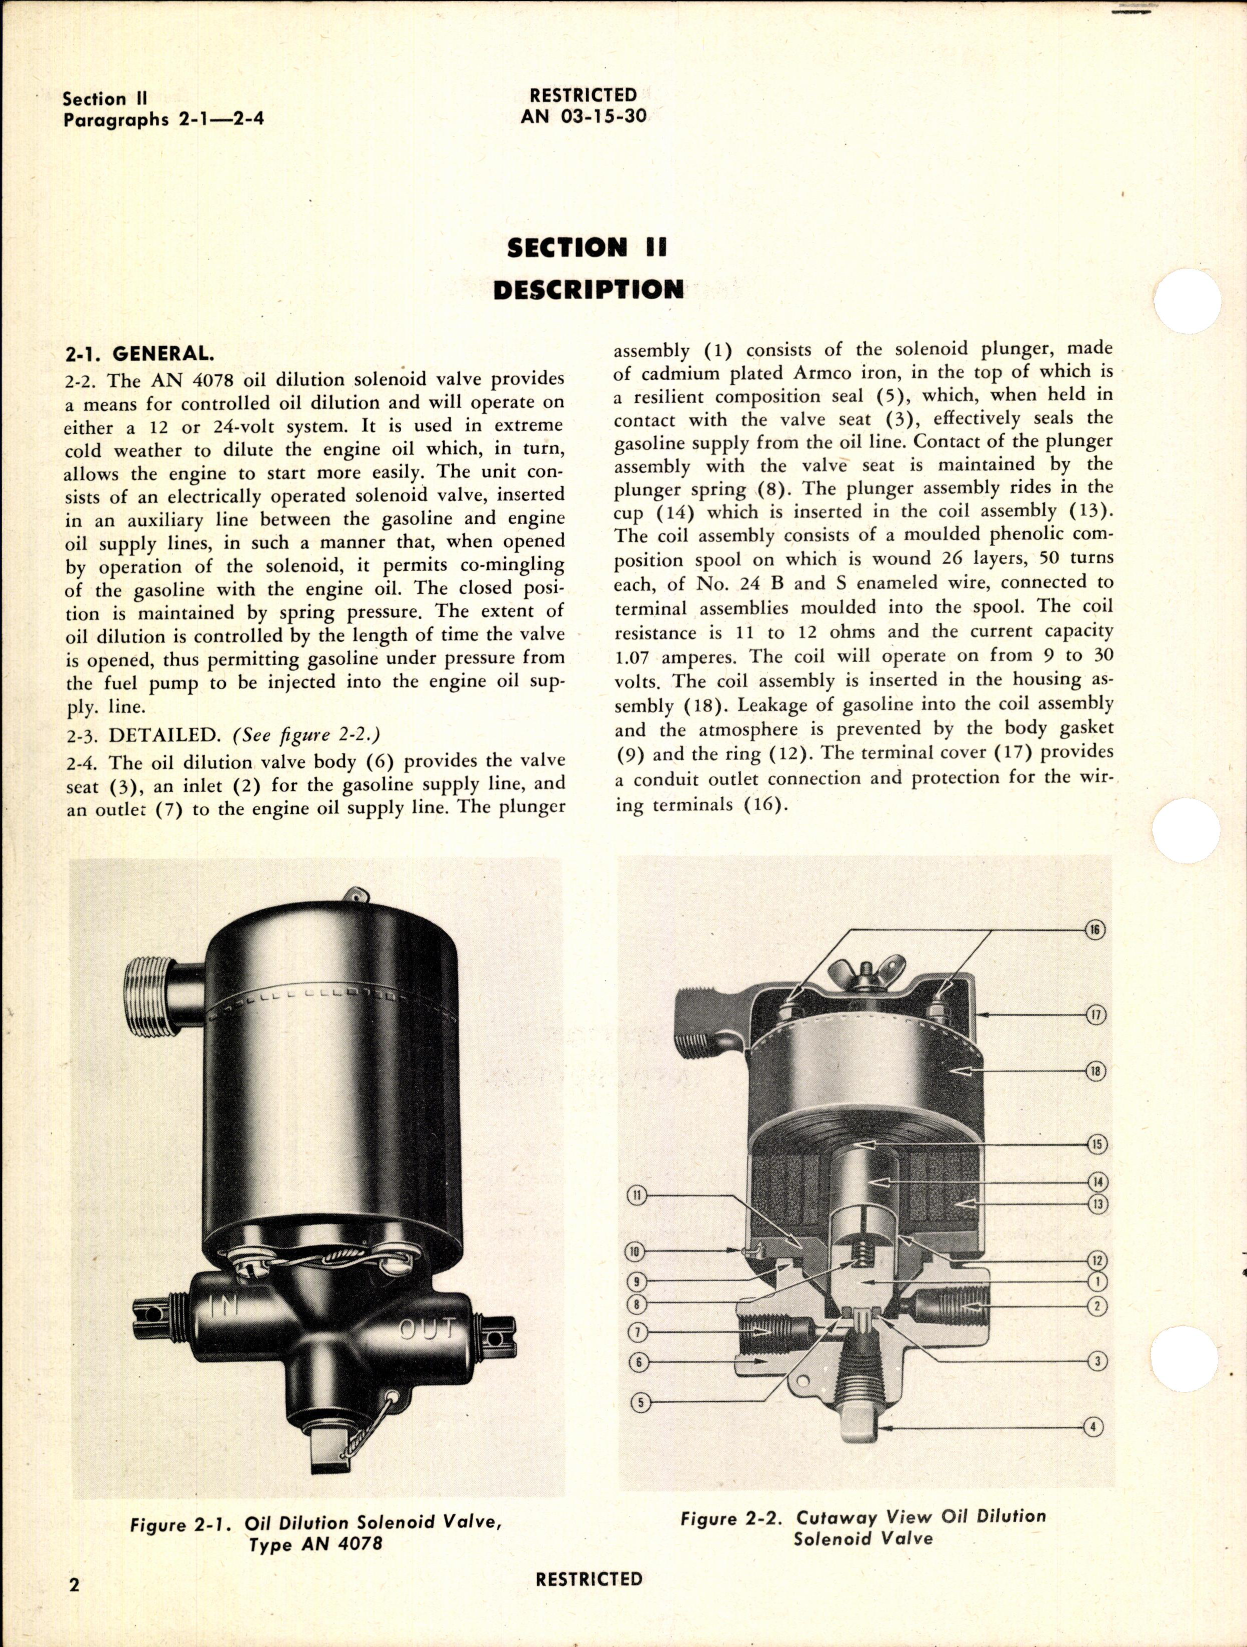 Sample page 4 from AirCorps Library document: Operation & Service Instructions for Oil Dilution Solenoid Valve Type AN 4078